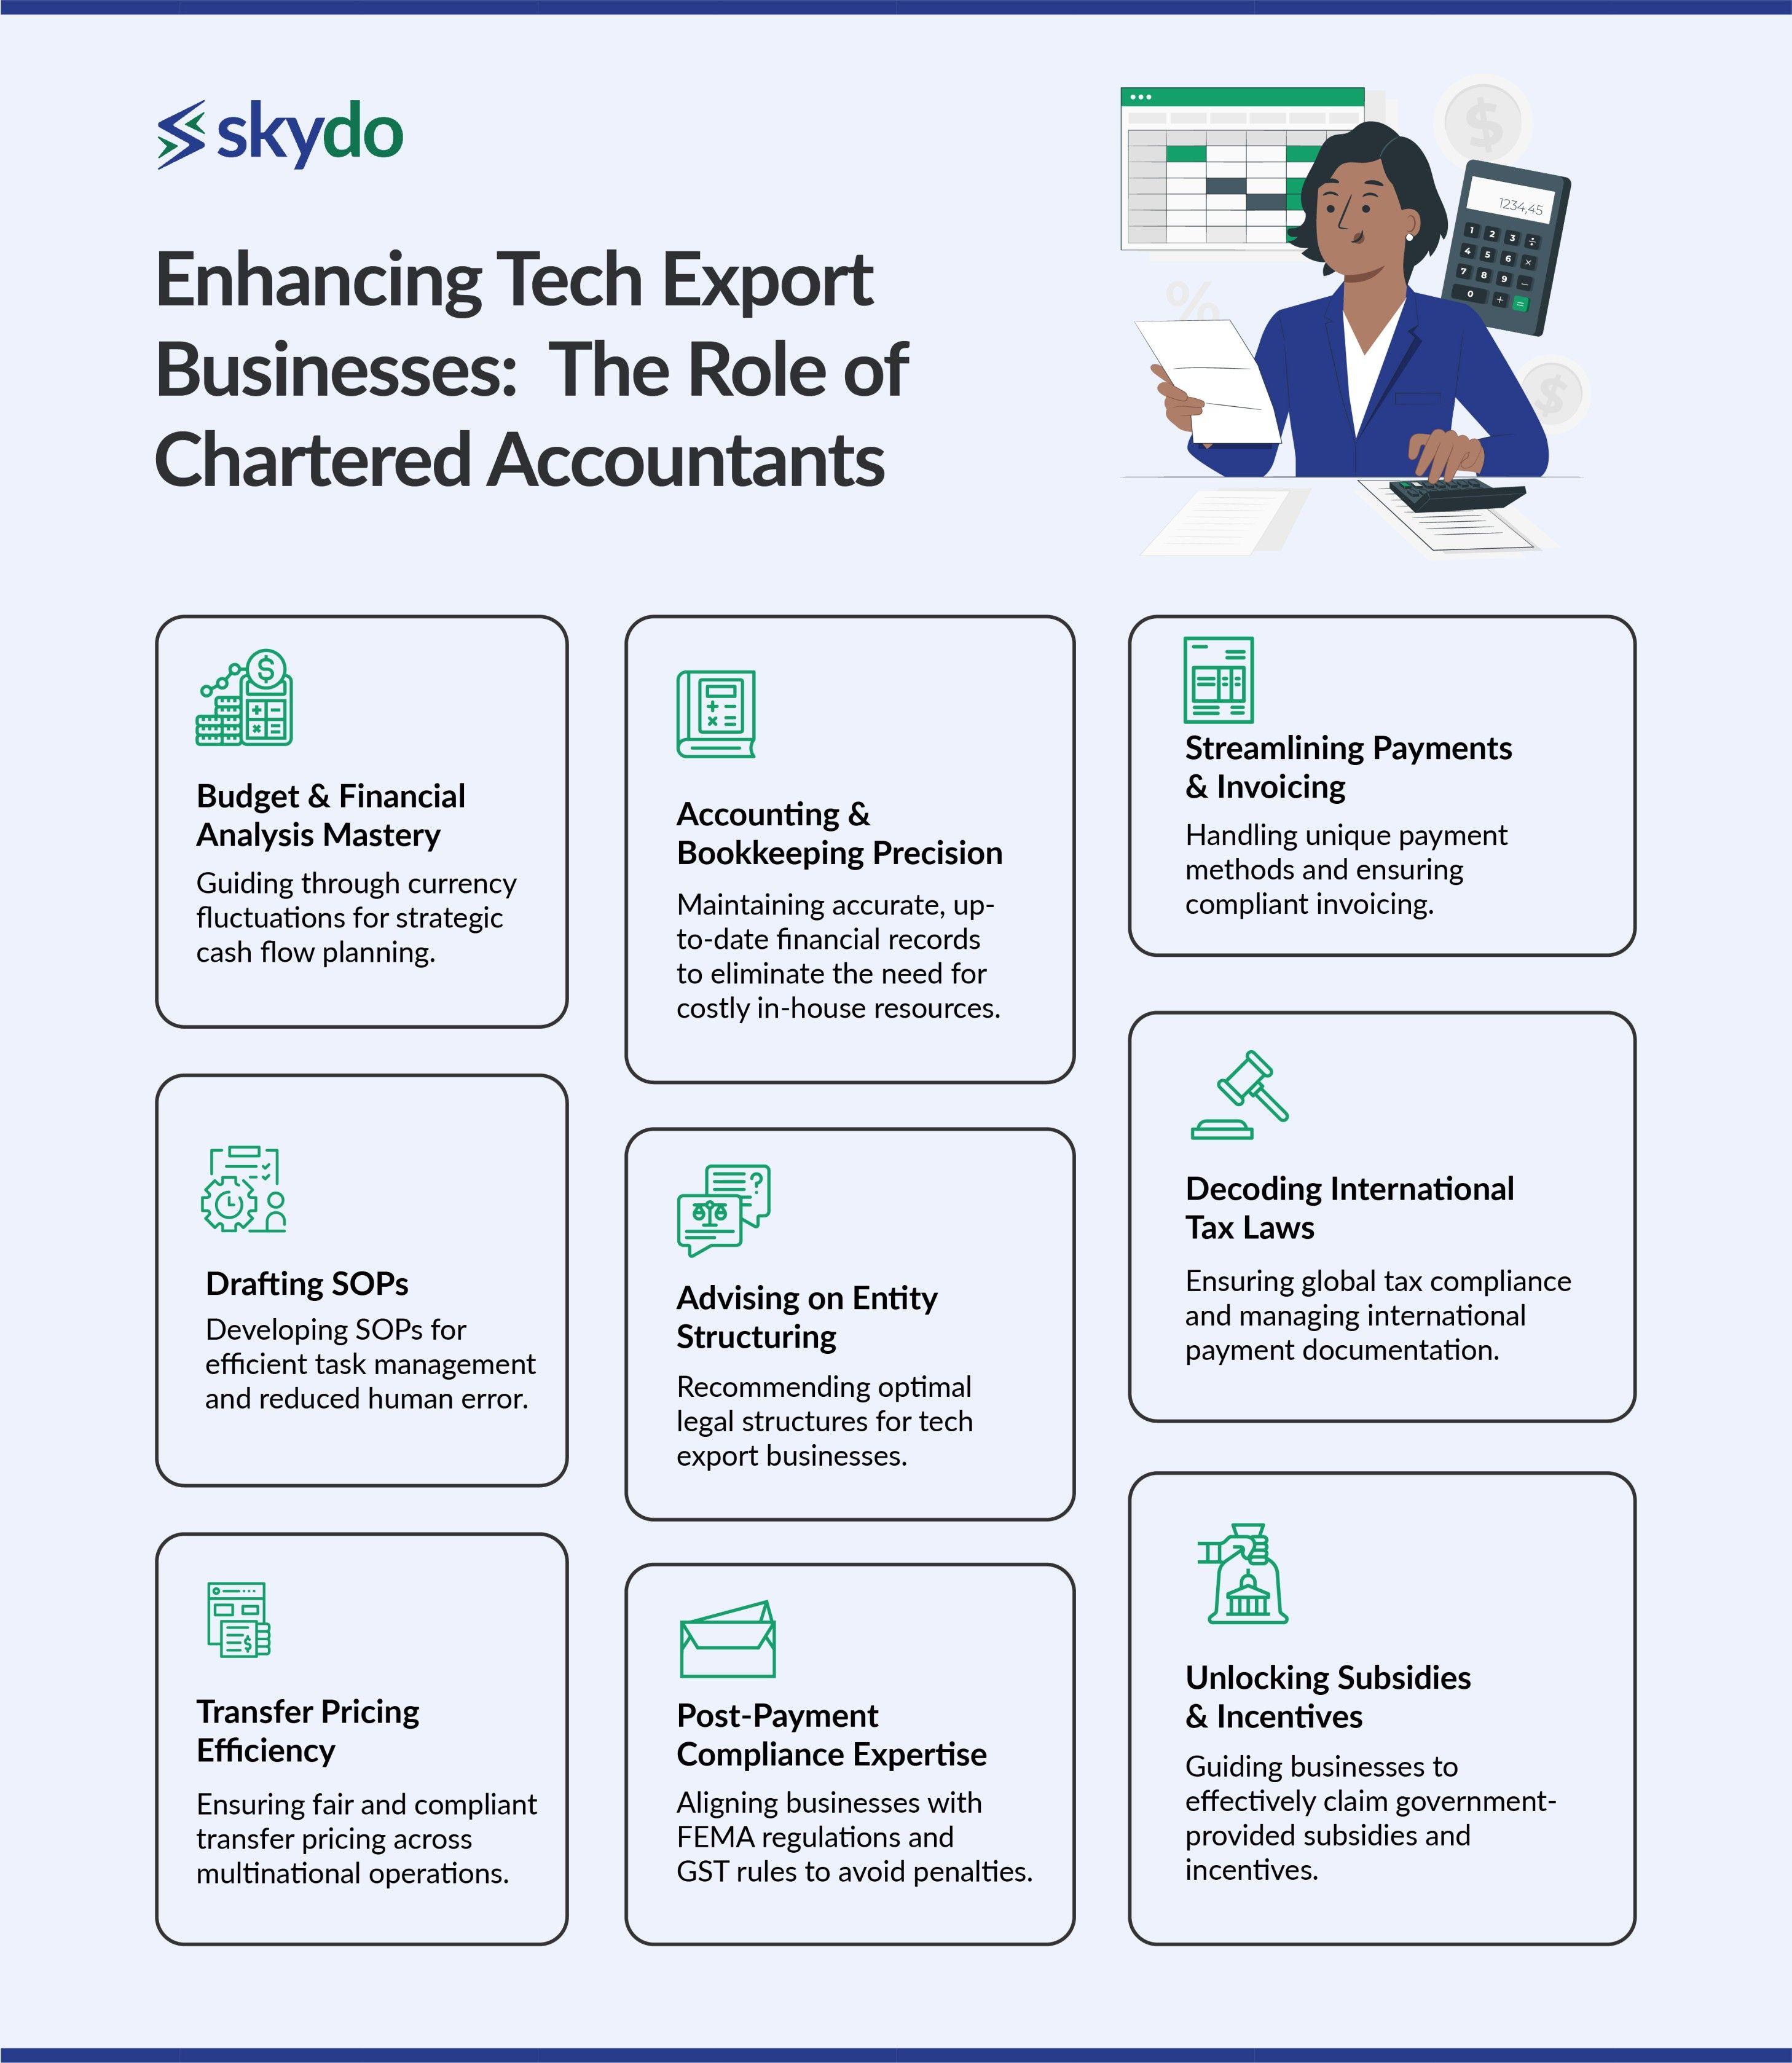 The Role of Chartered Accountants